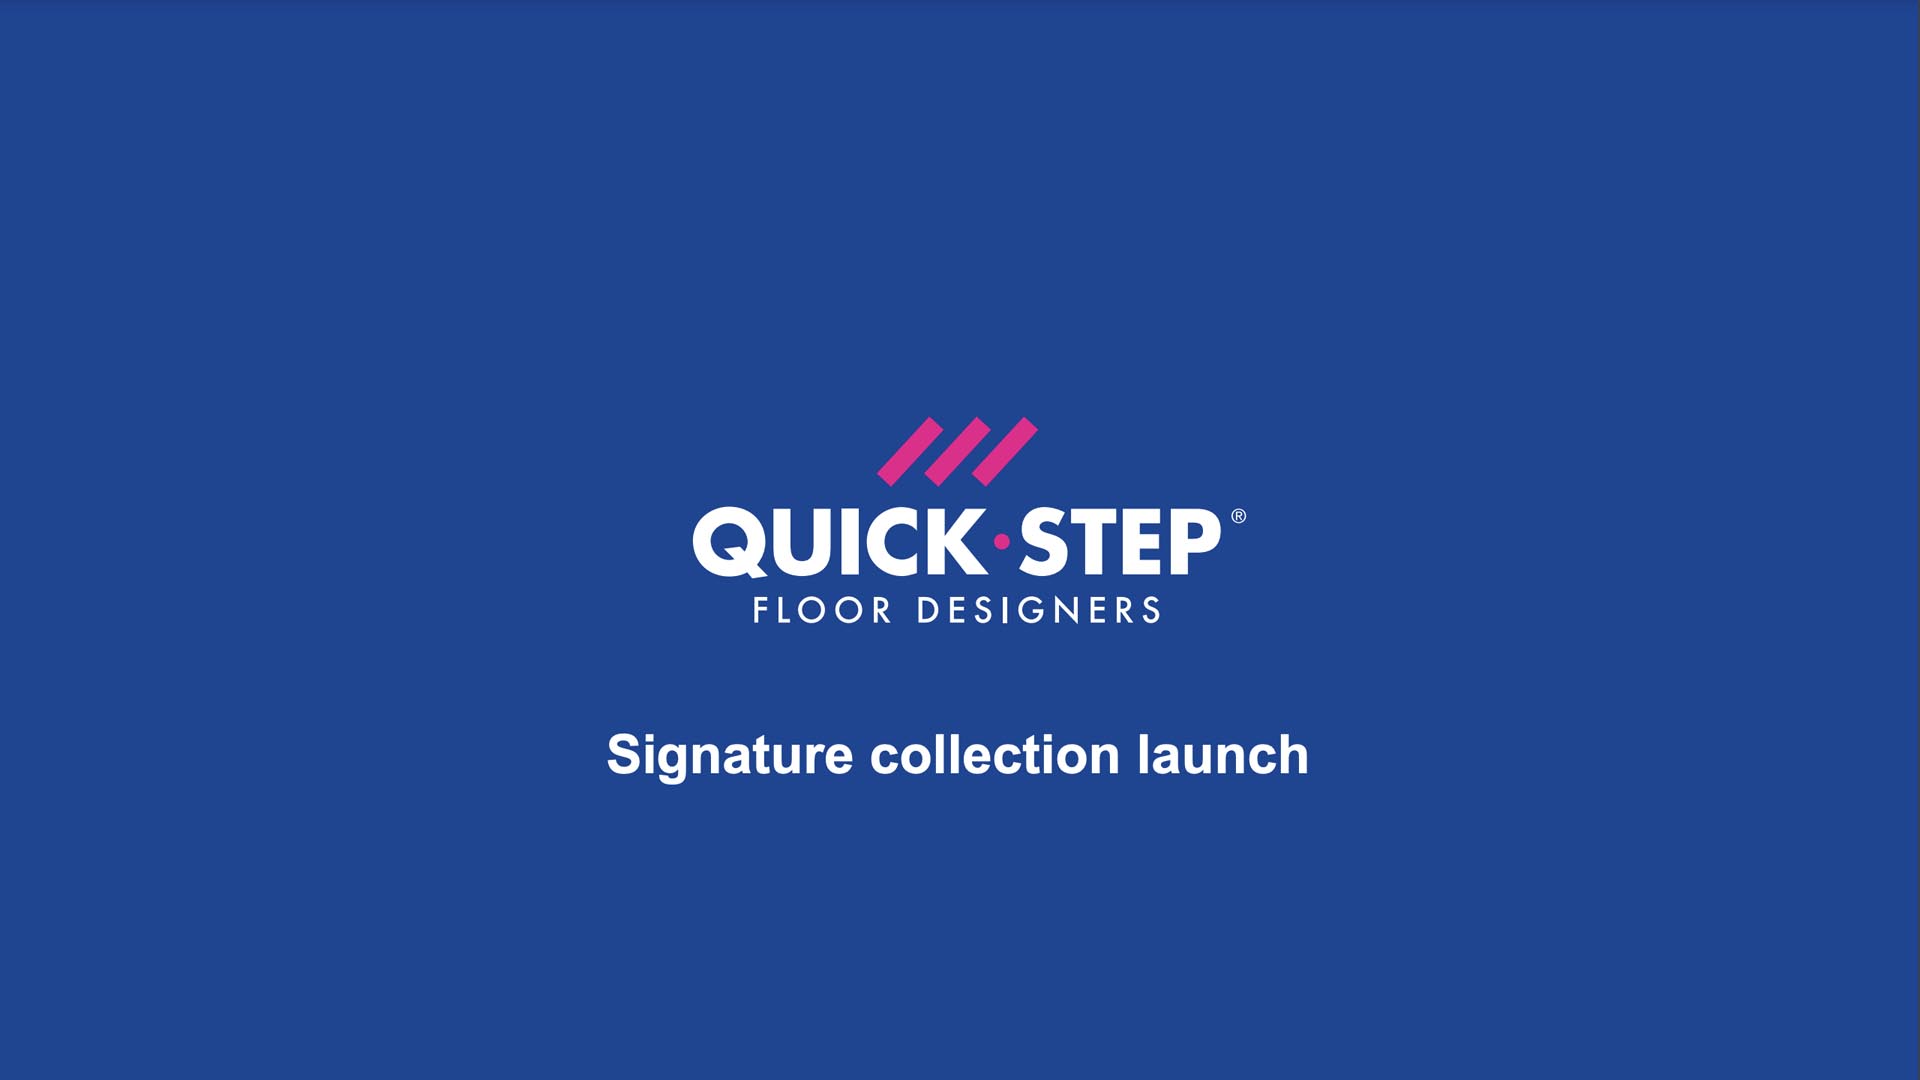 Vega Digital Awards Winner - Quick-Step Signature Collection Launch Event, Ulled Asociados